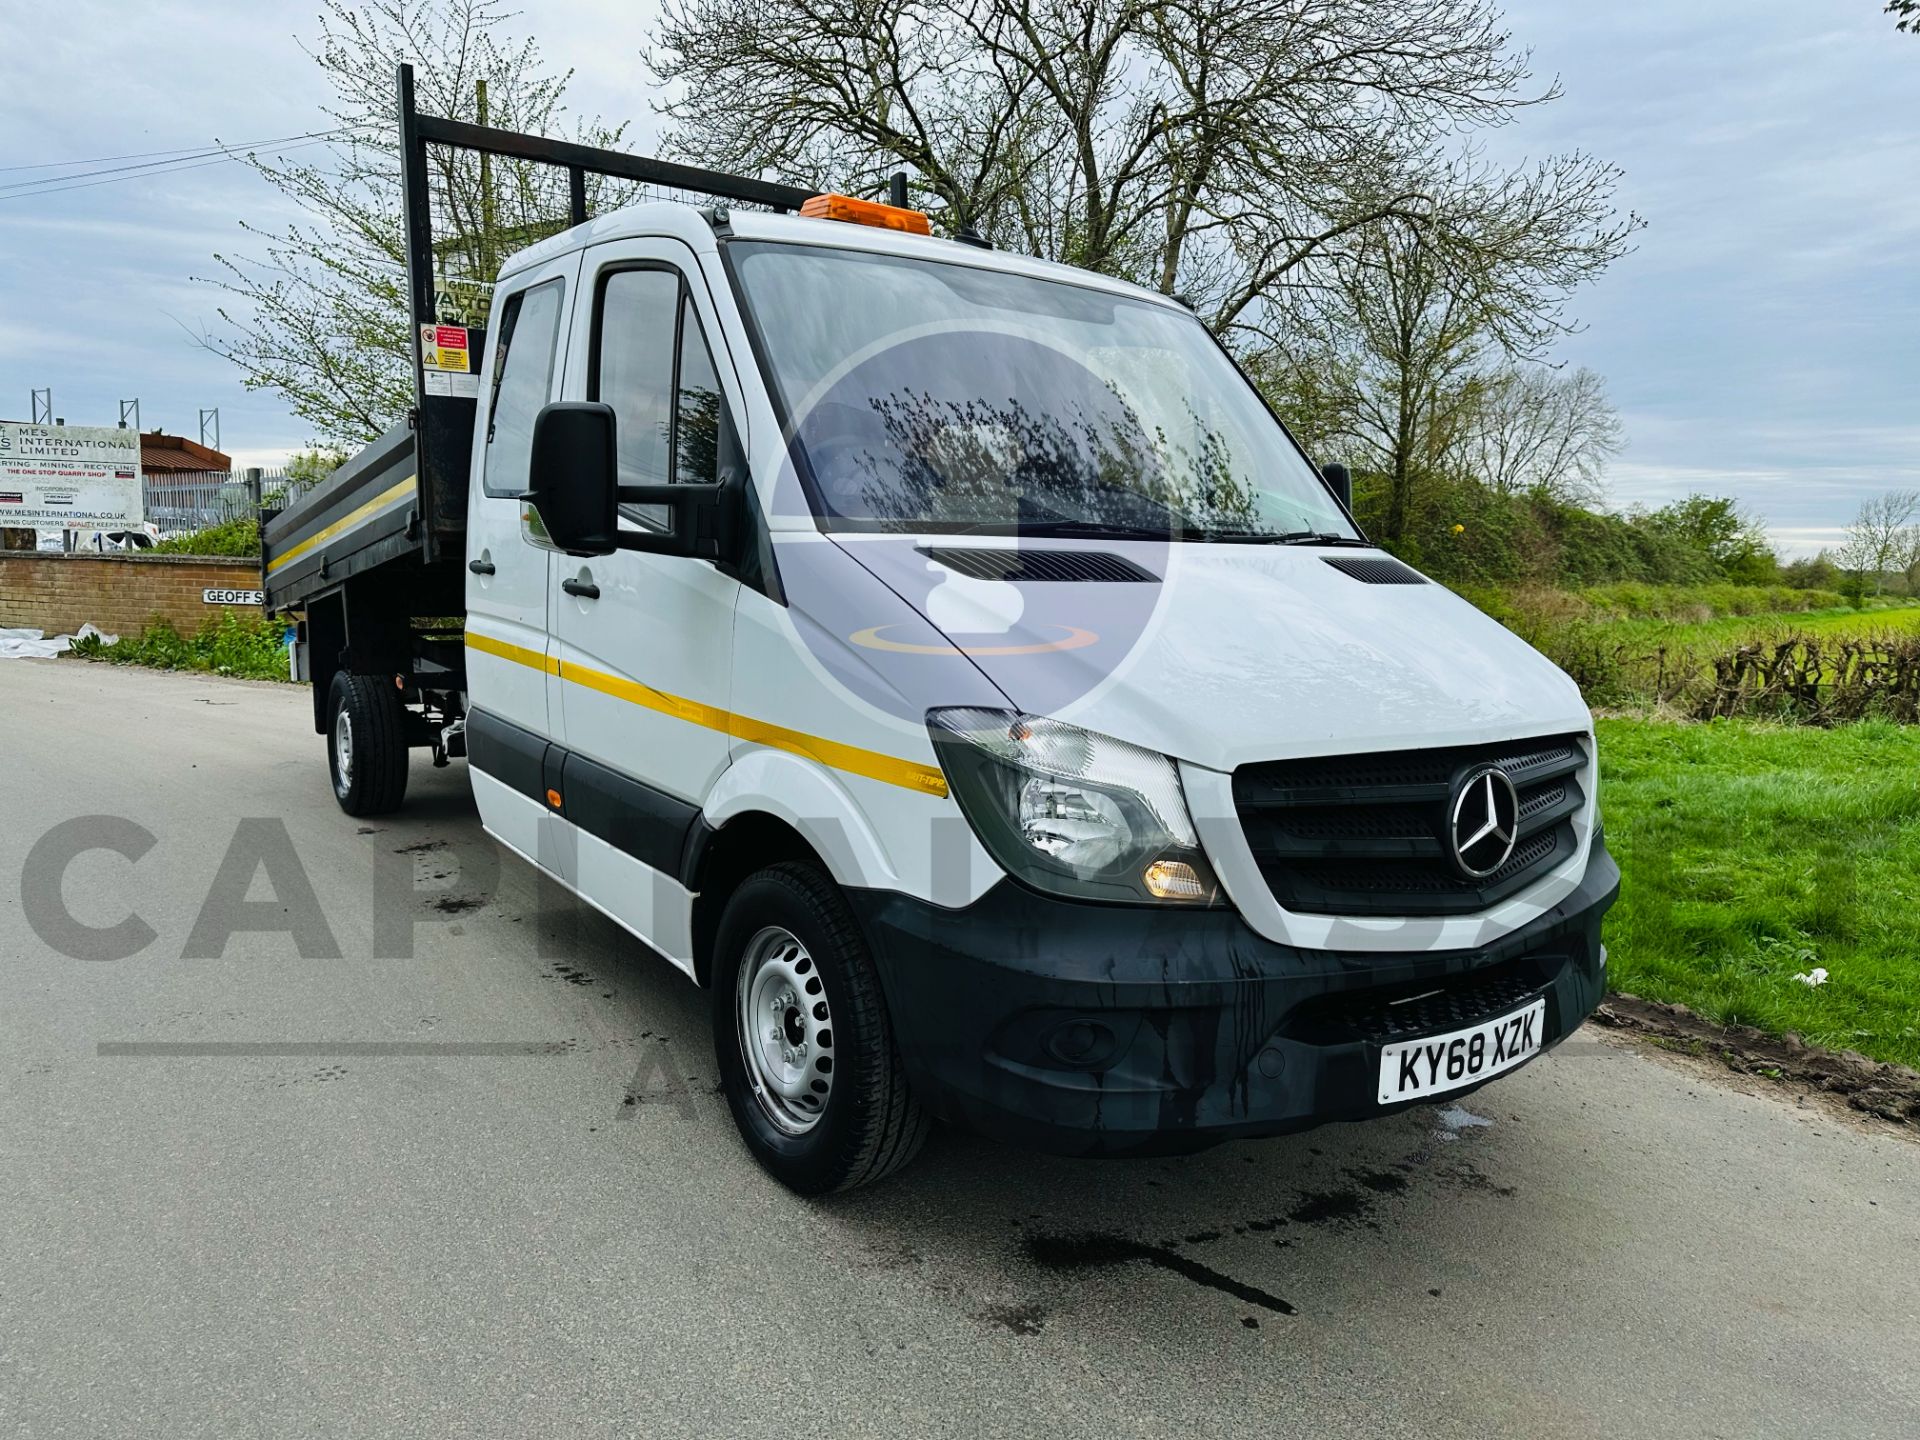 (ON SALE) MERCEDES SPRINTER 314 CDI *DOUBLE CAB TIPPER TRUCK* BLUETEC EDITION - 2019 MODEL 35K MILES - Image 2 of 31